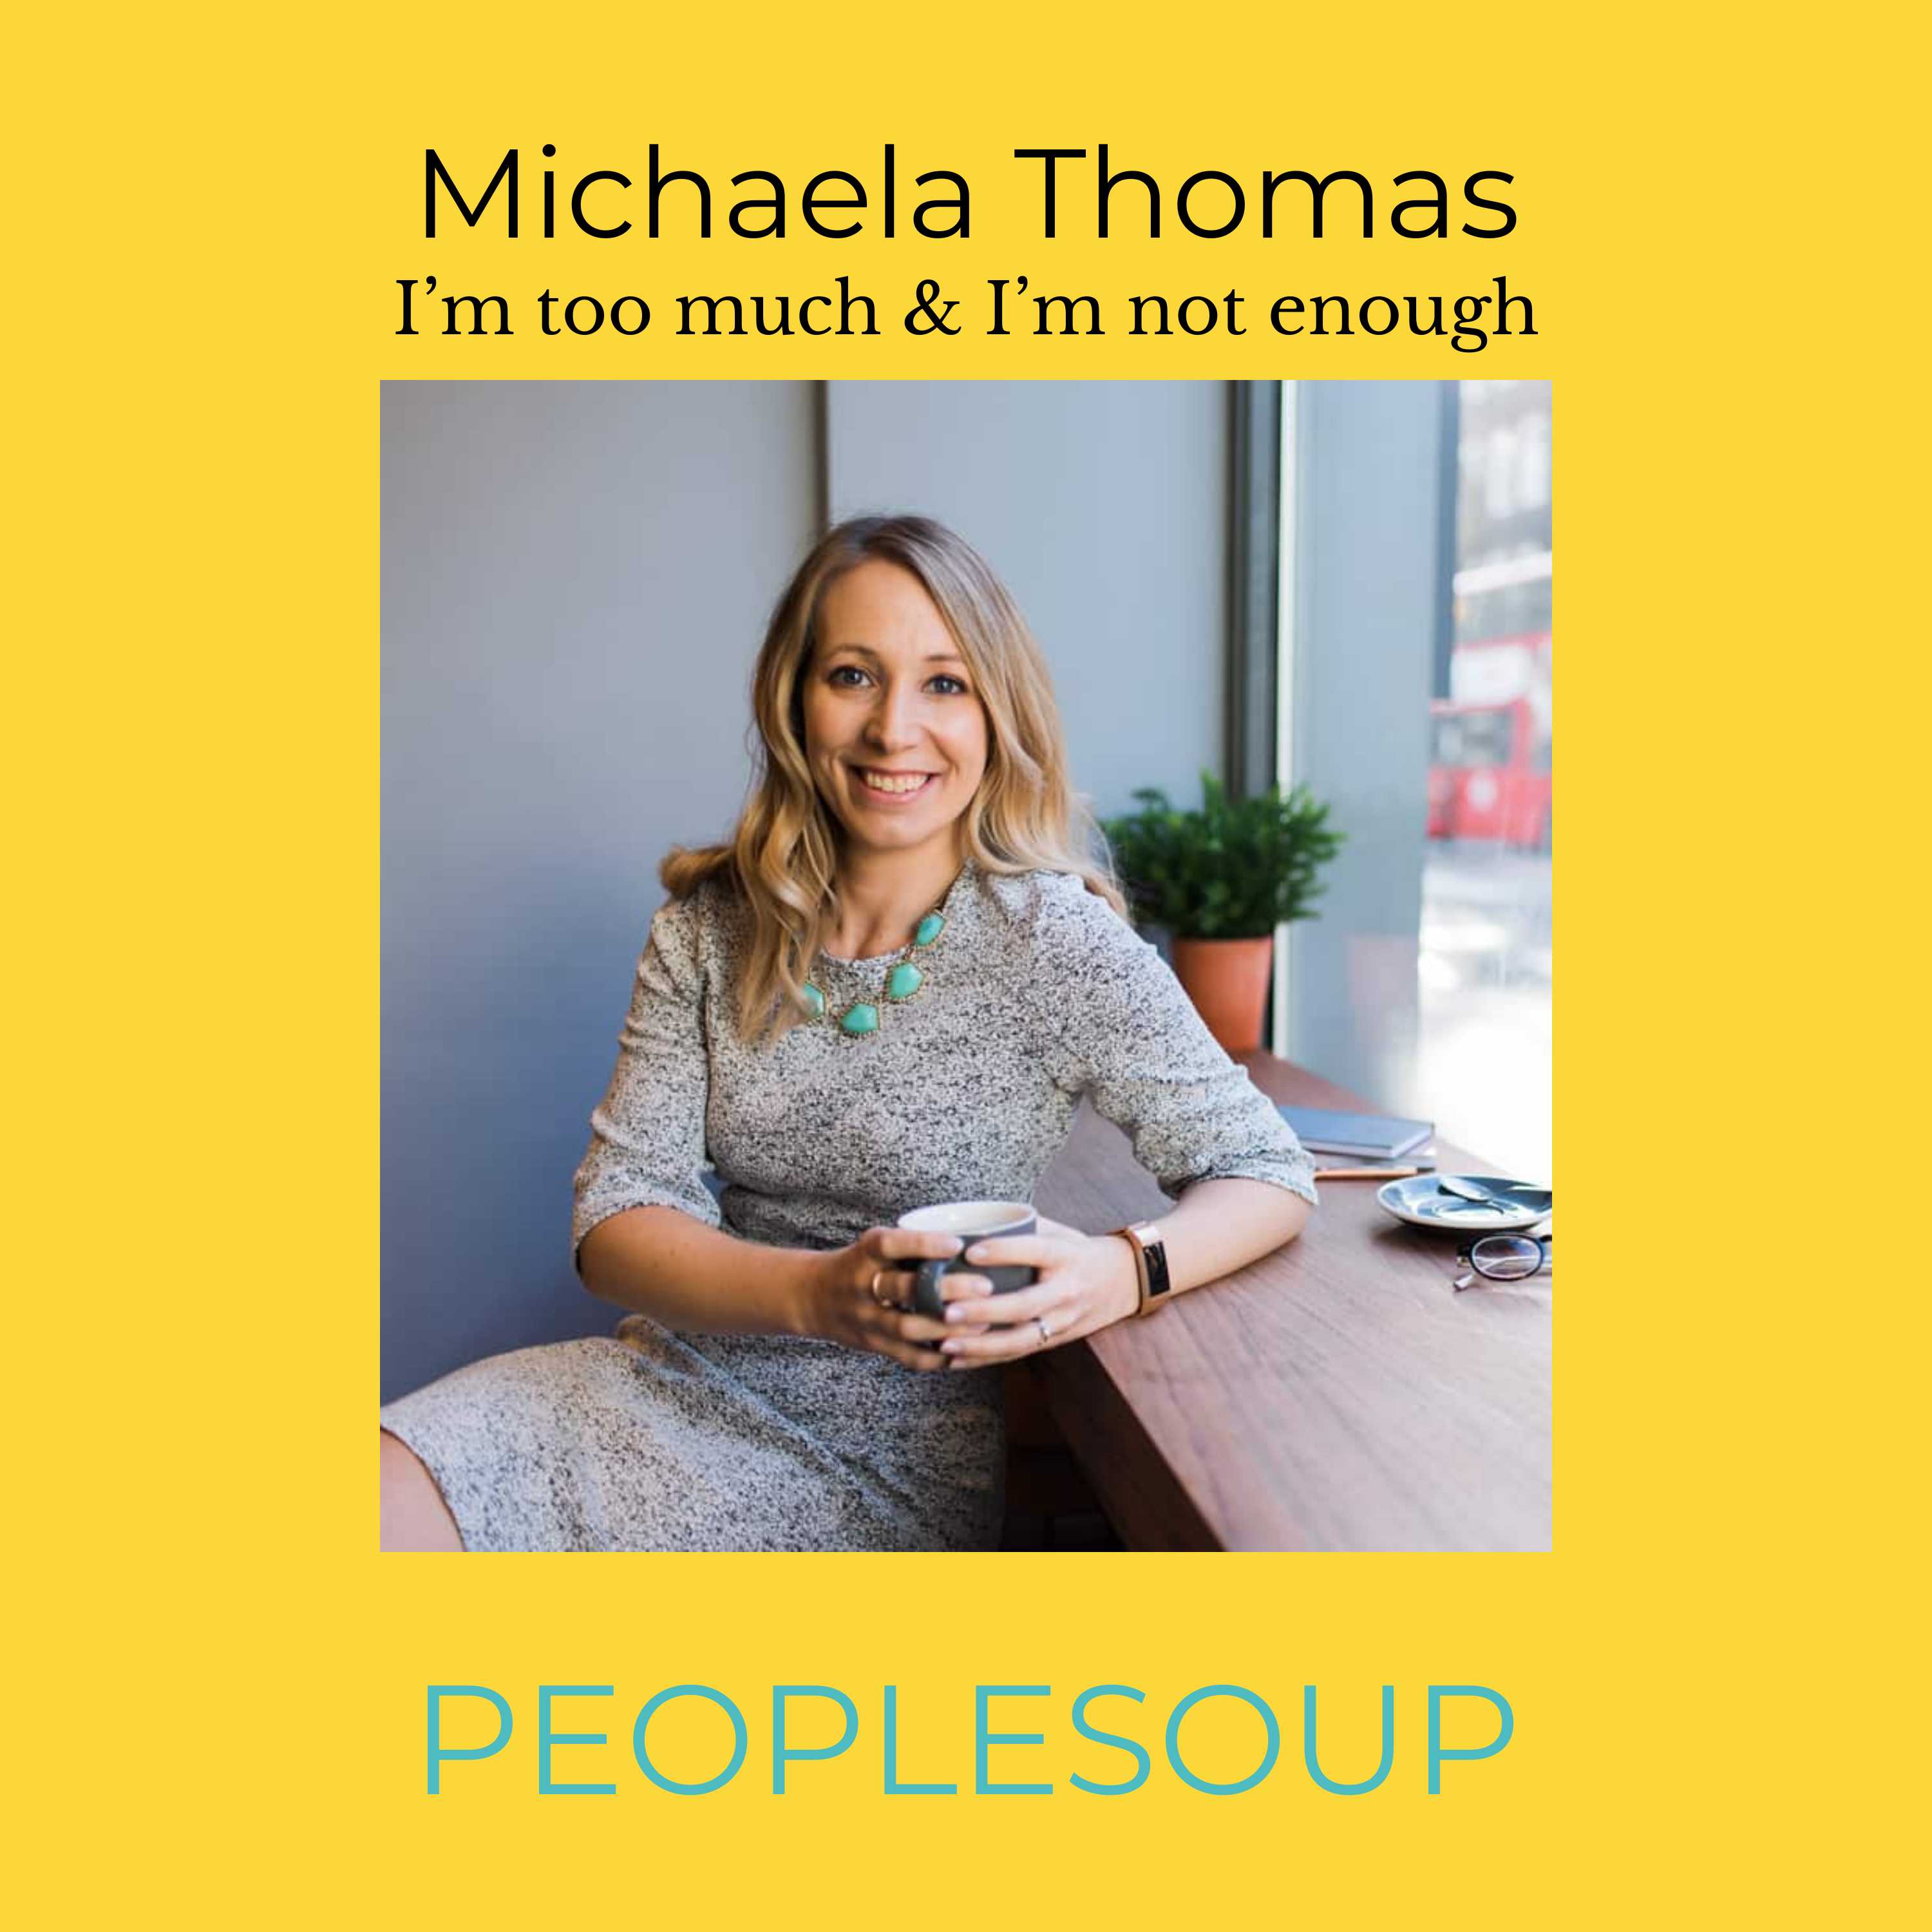 I'm too much and I'm not enough with Michaela Thomas